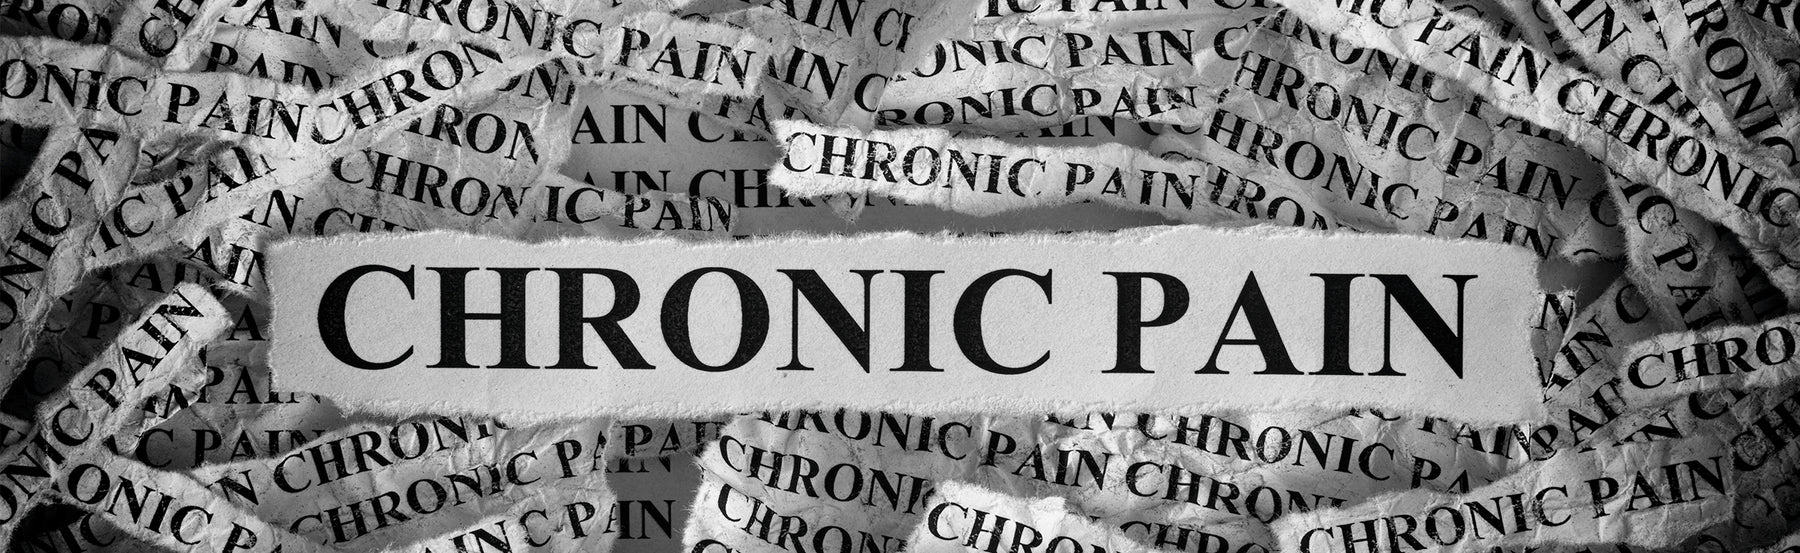 Recognizing and Treating Chronic Pain